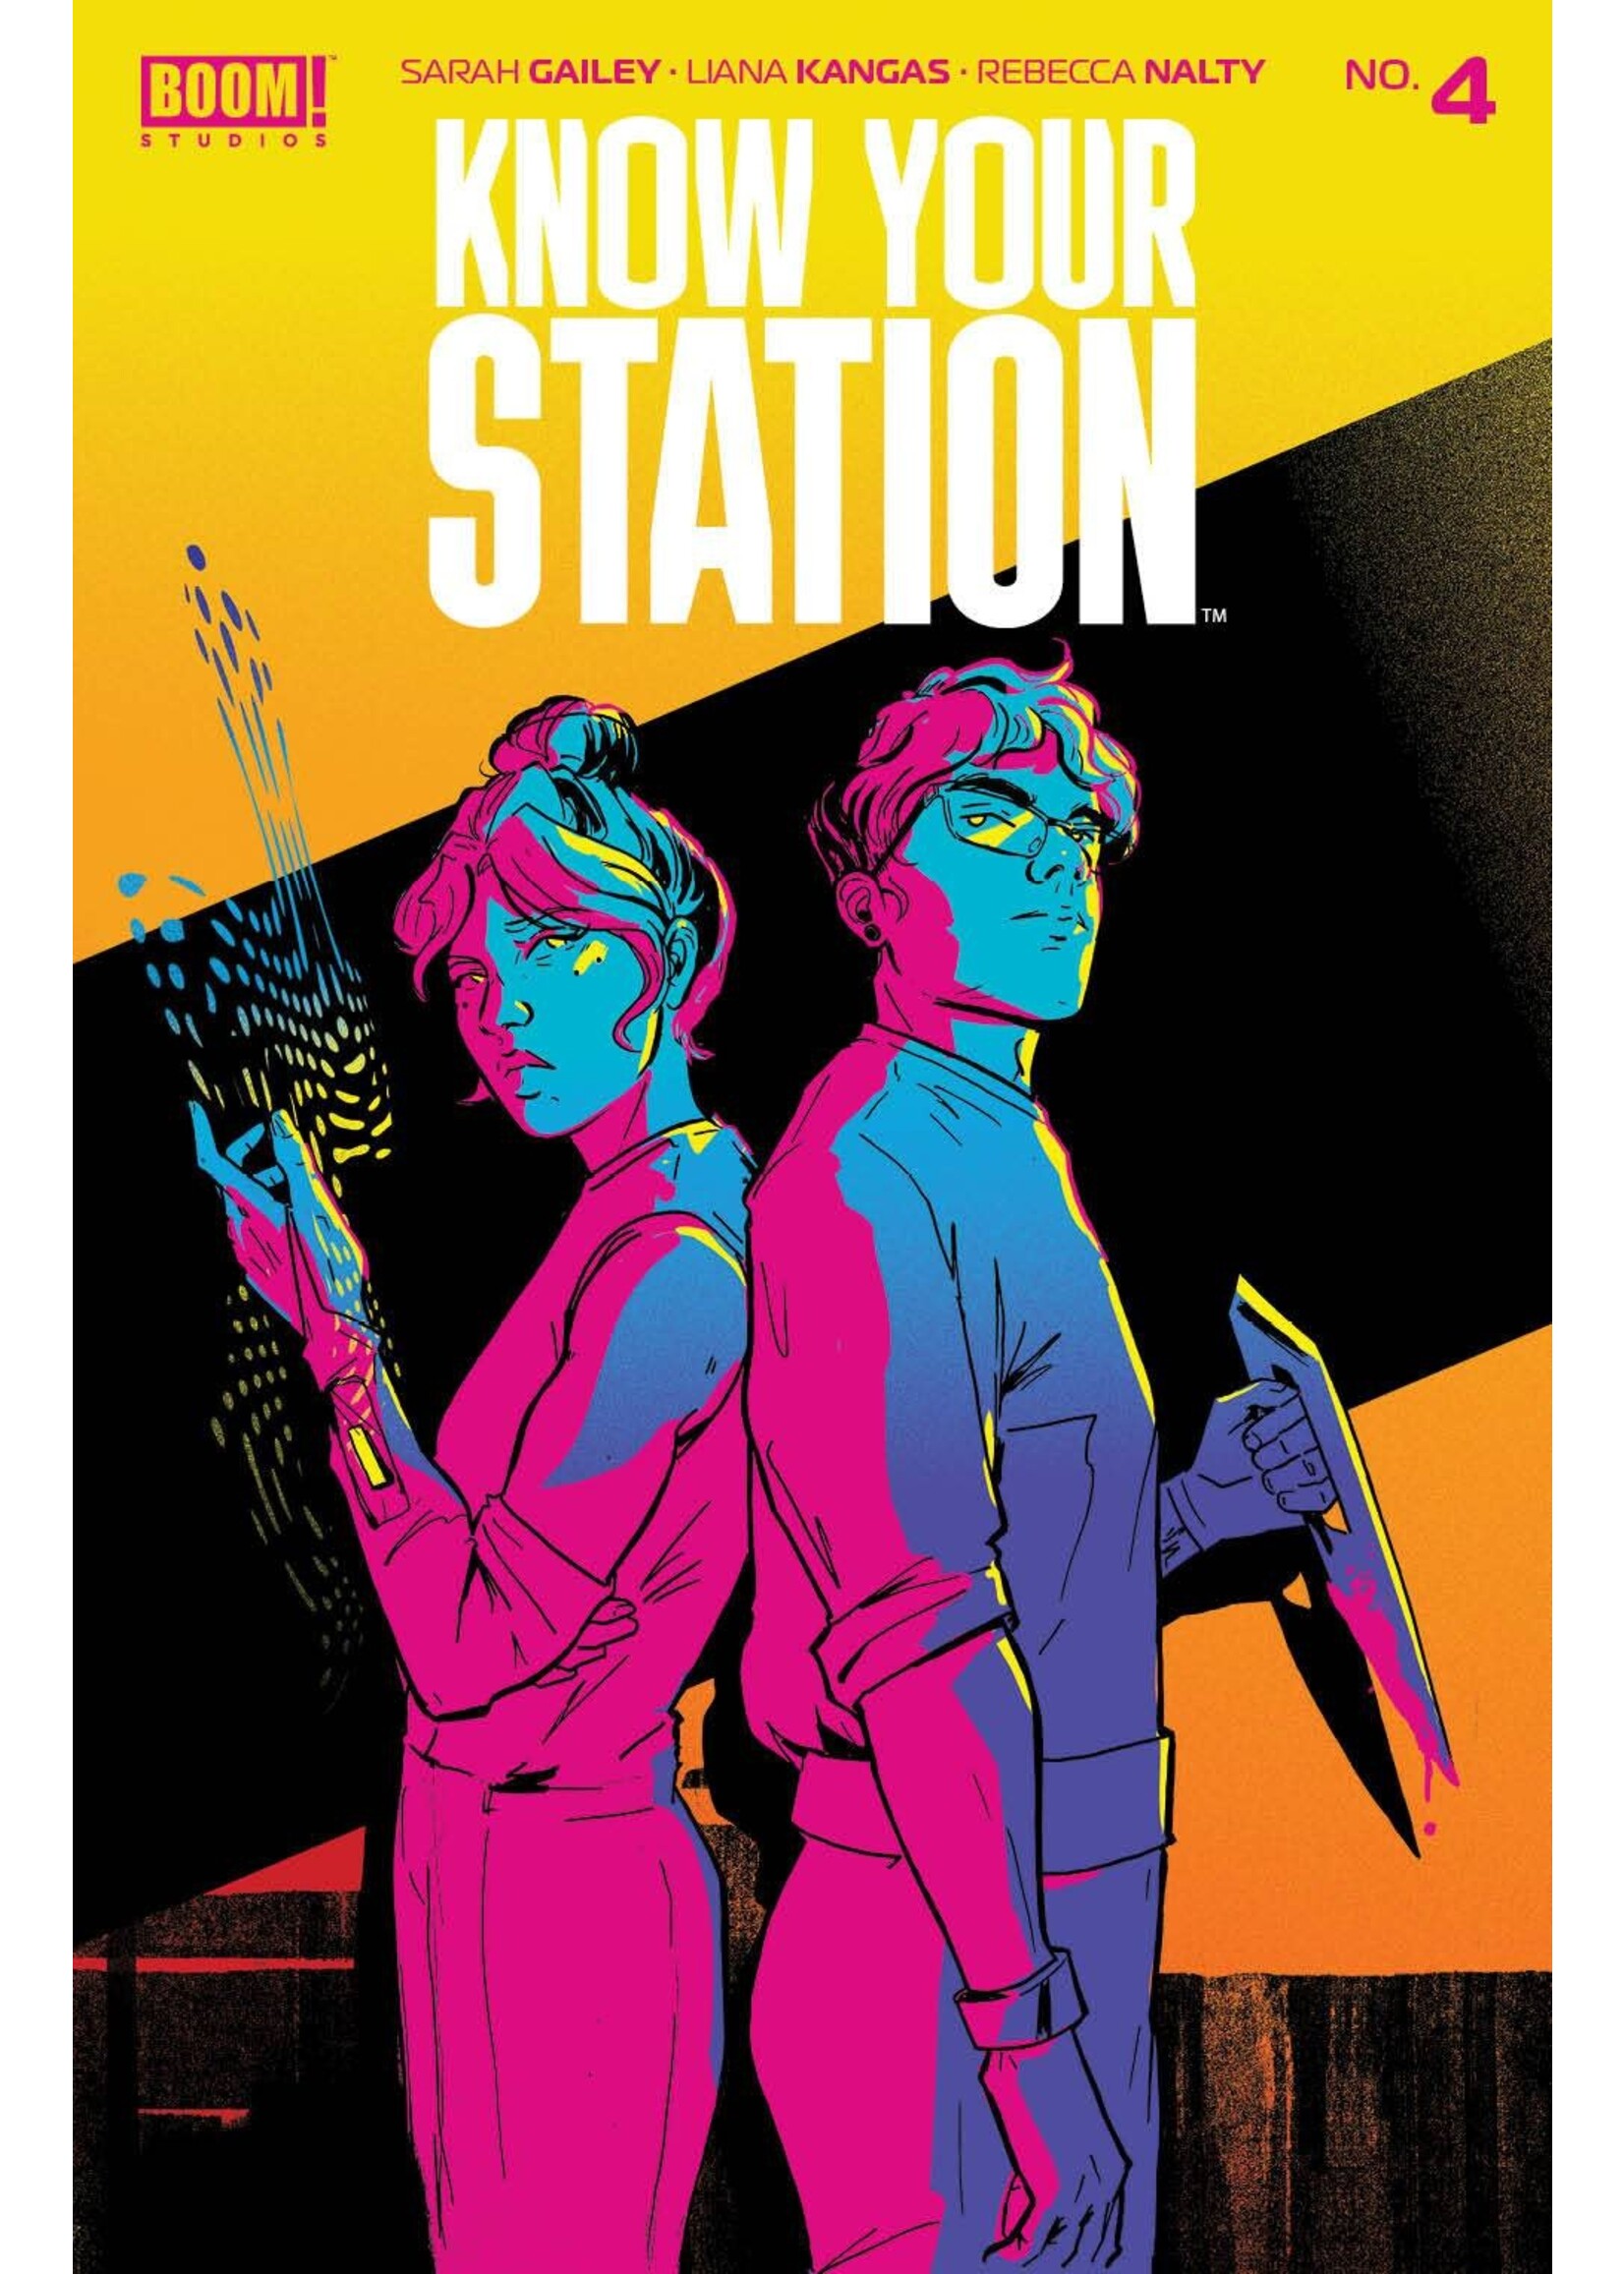 BOOM! STUDIOS KNOW YOUR STATION complete 5 issue series